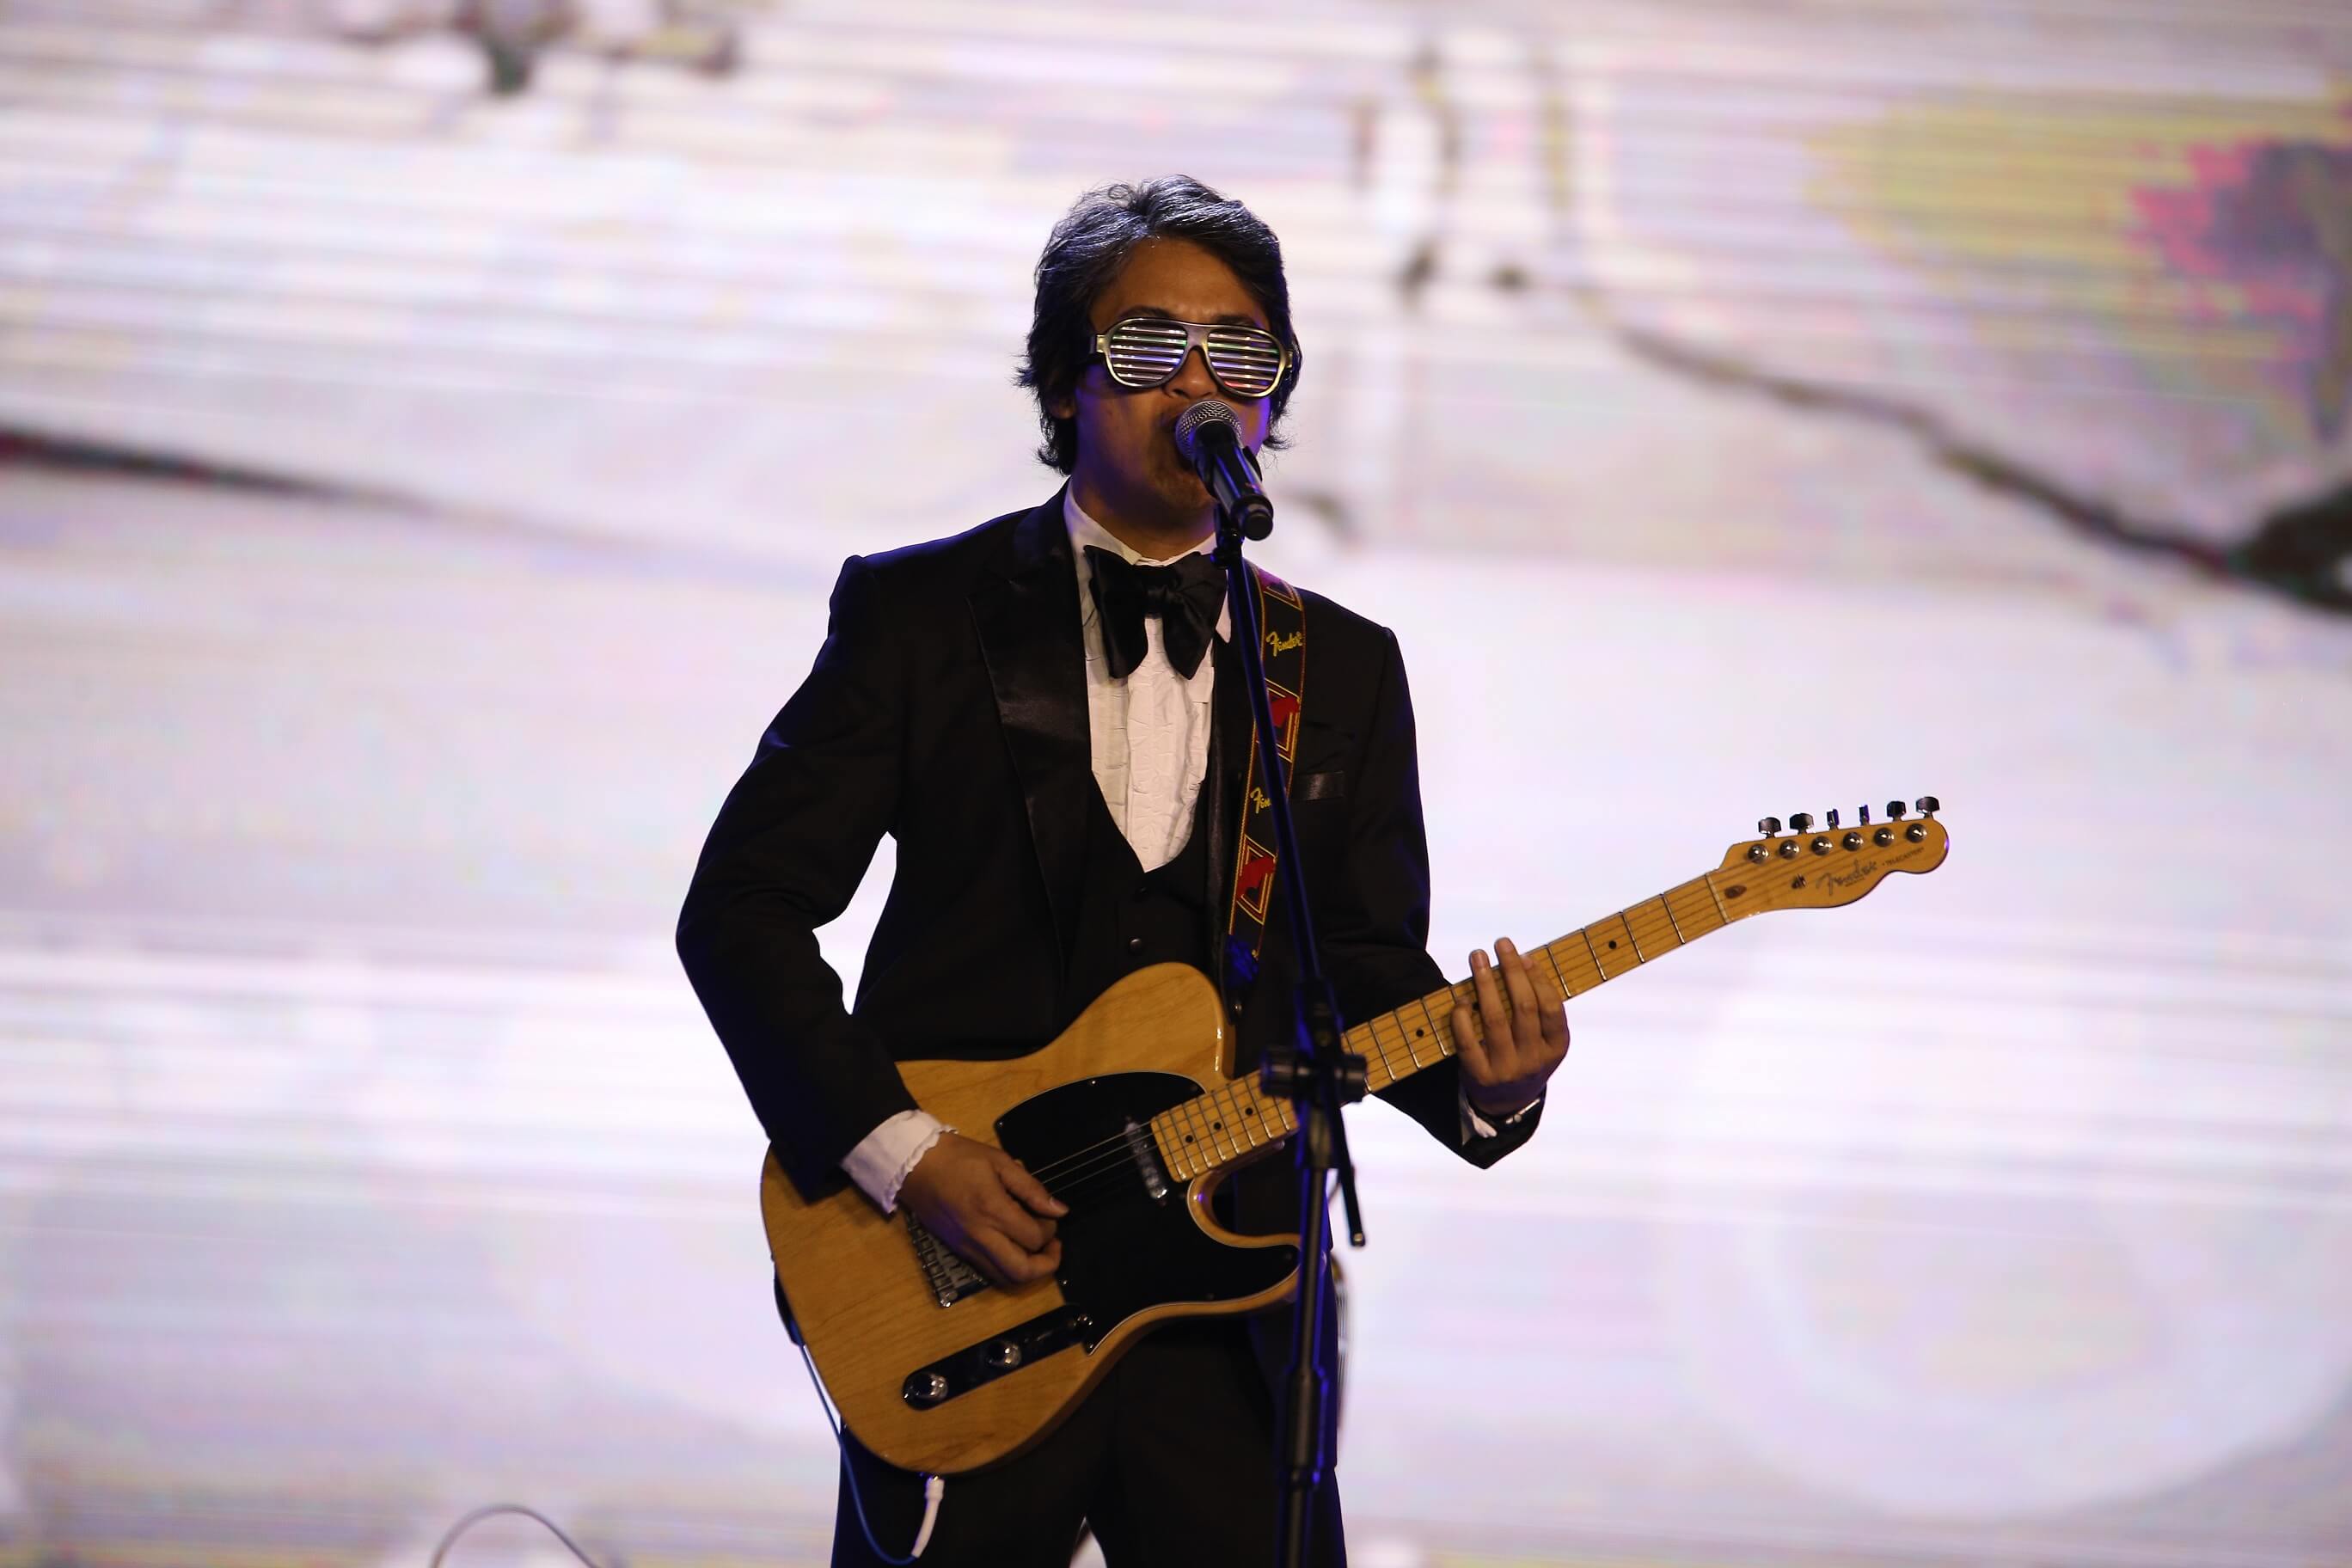 Ely Buendia ending the night on a high note